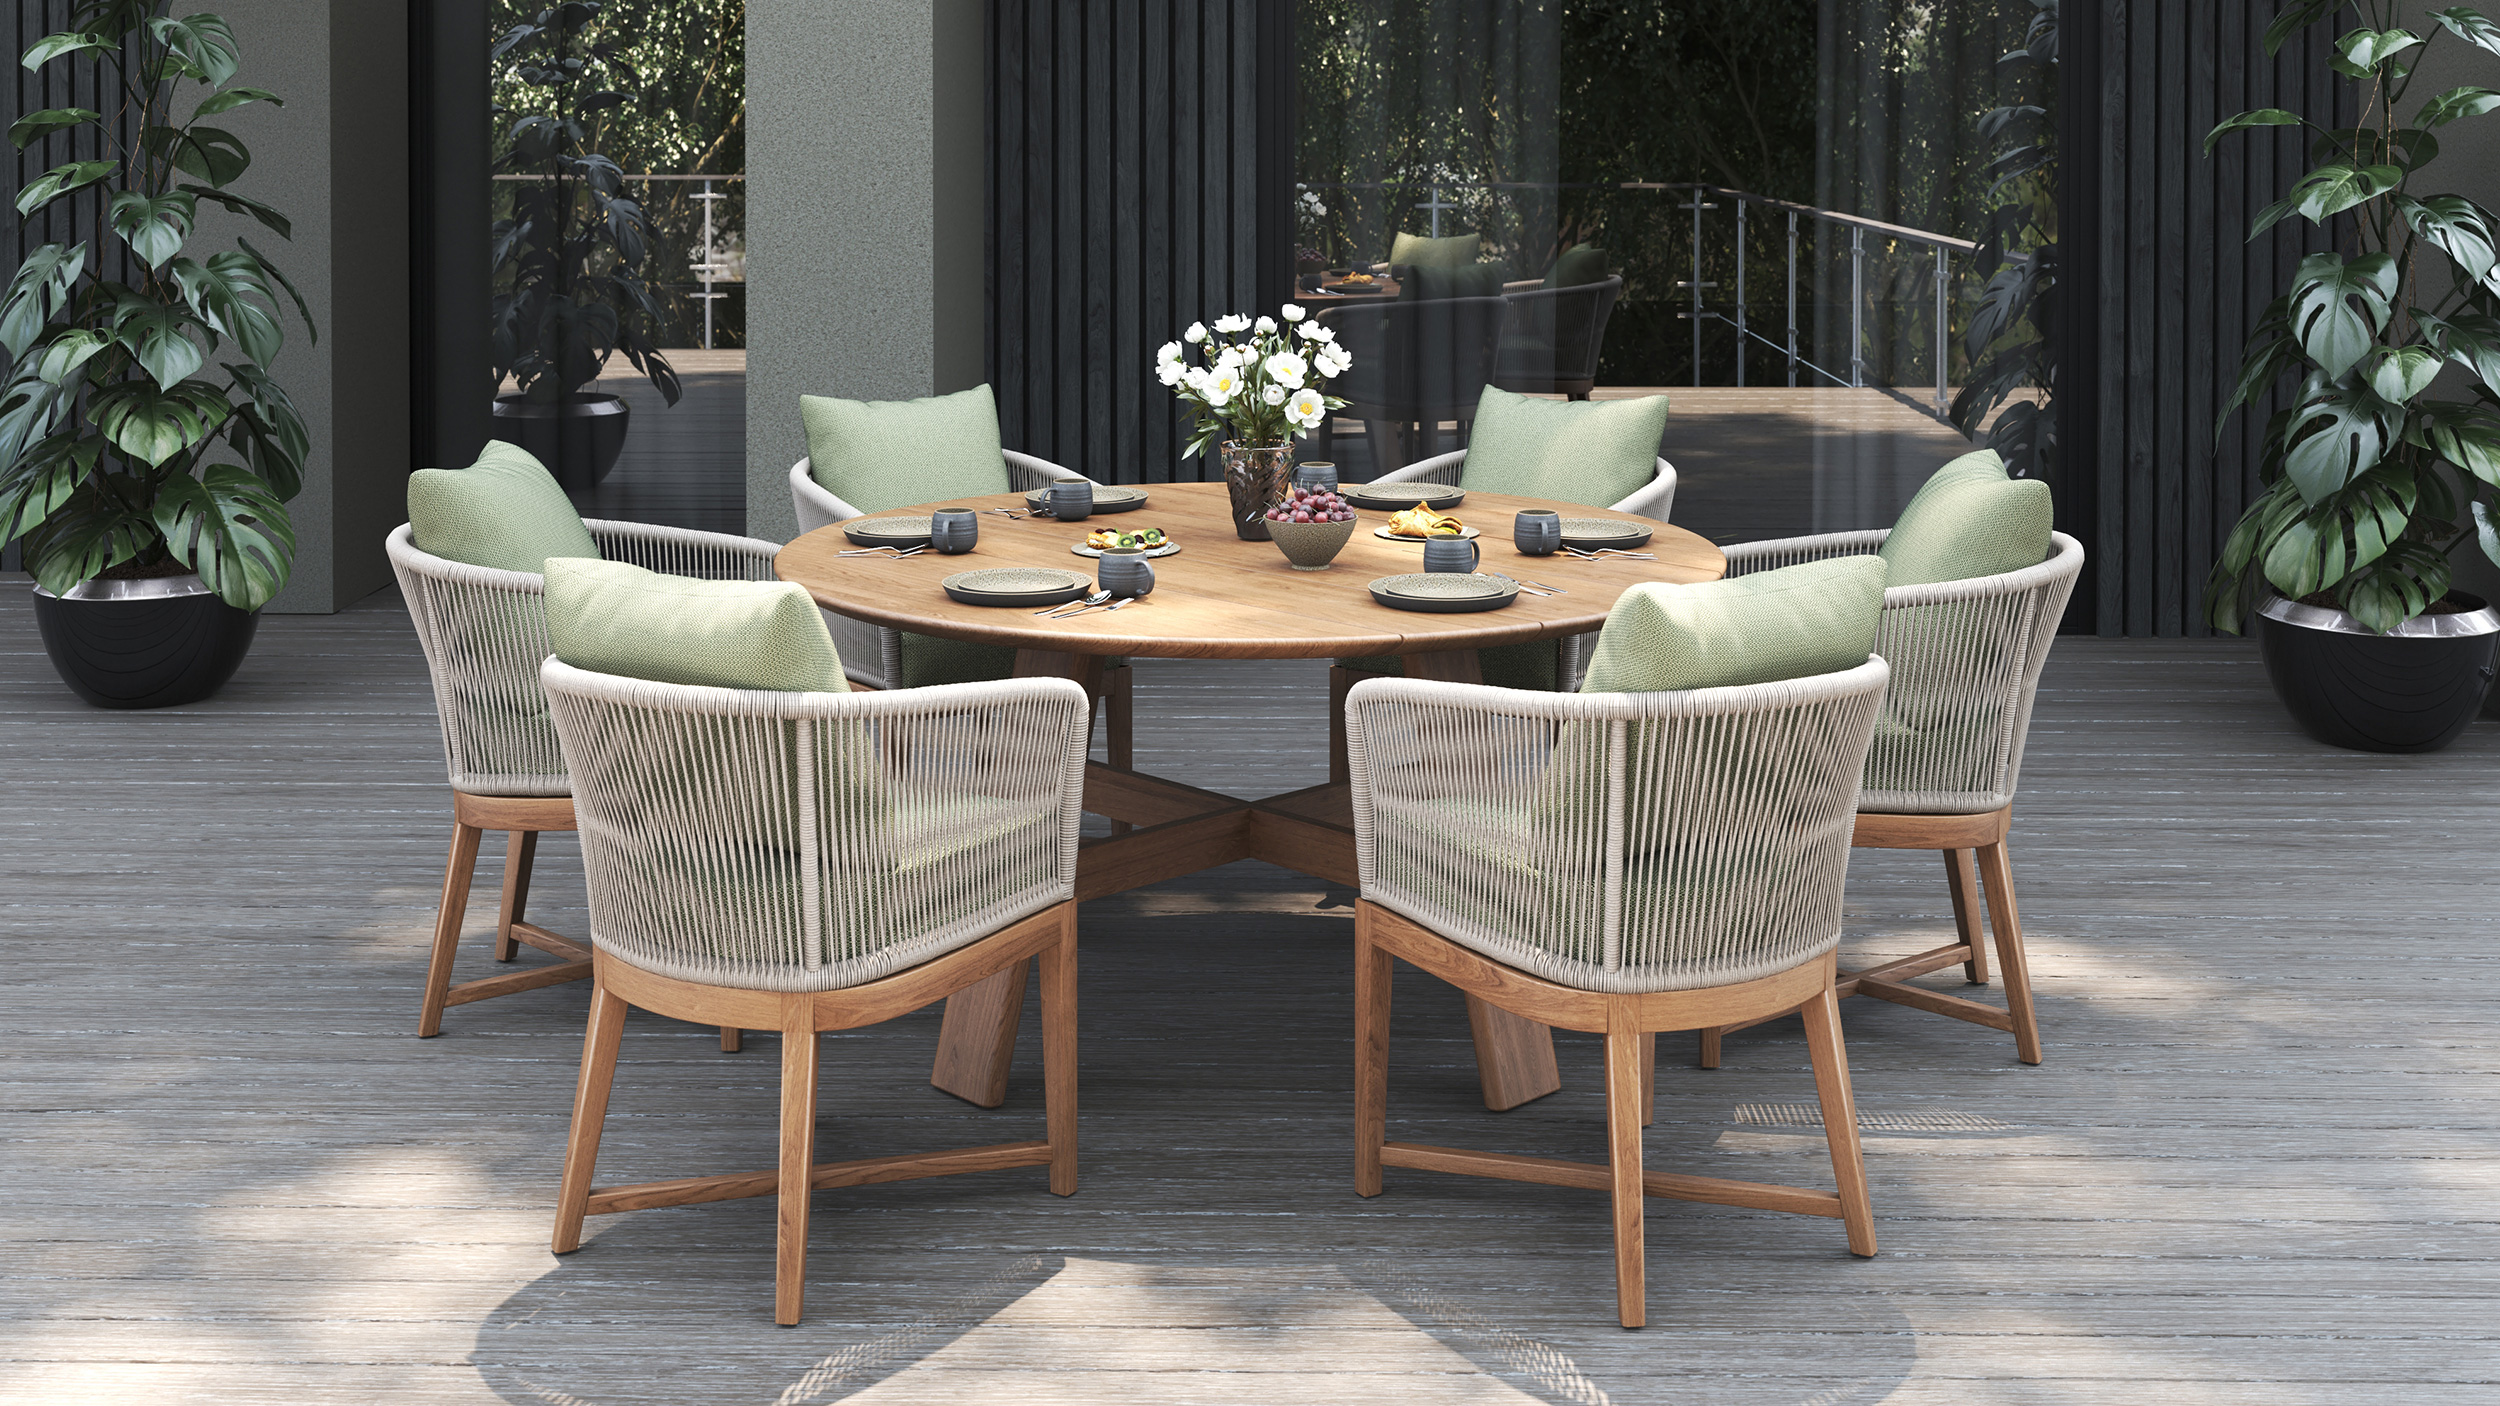 Emmilie Dining Chair Fontelina Green Octa Round 150 Dining Tableside View.effectsresult 1